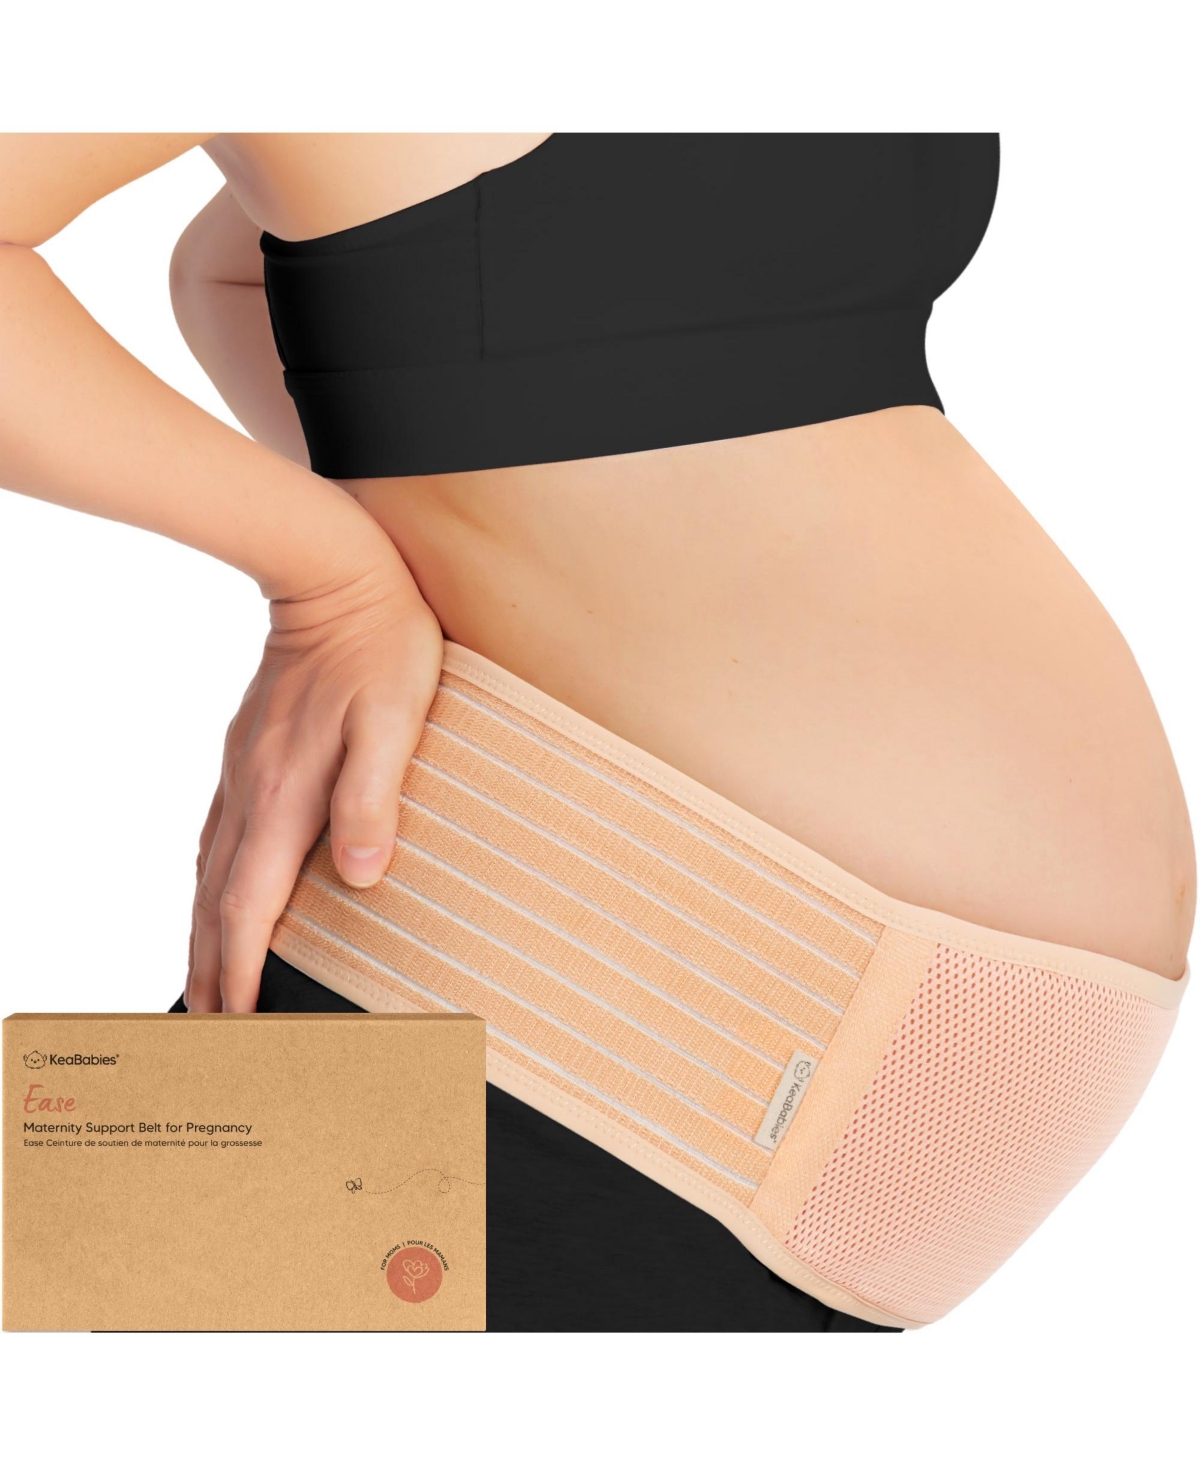 Keababies Maternity Belly Band For Pregnancy, Soft & Breathable Pregnancy Belly Support Belt In Classic Ivory